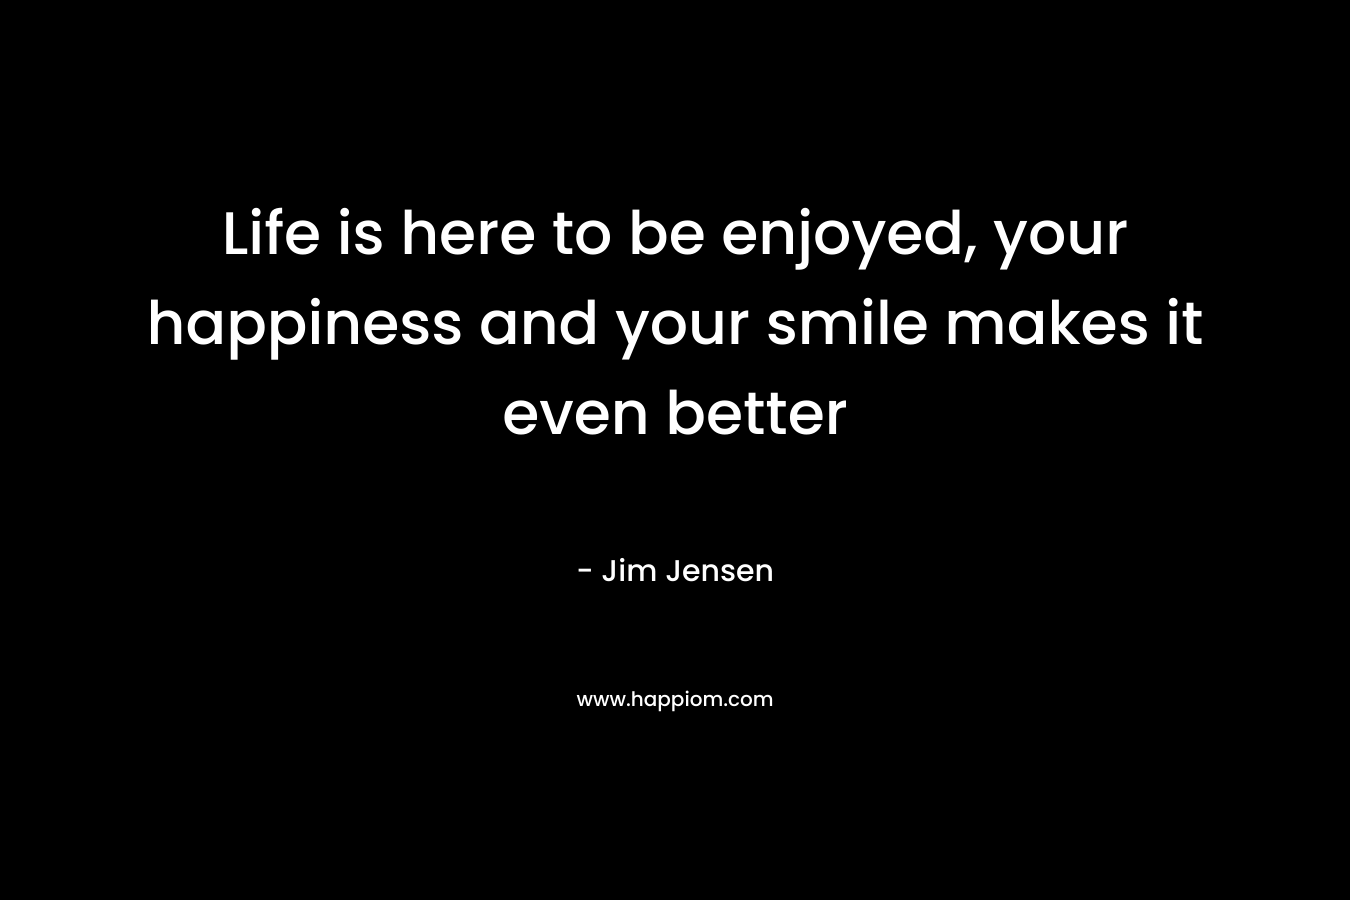 Life is here to be enjoyed, your happiness and your smile makes it even better – Jim Jensen